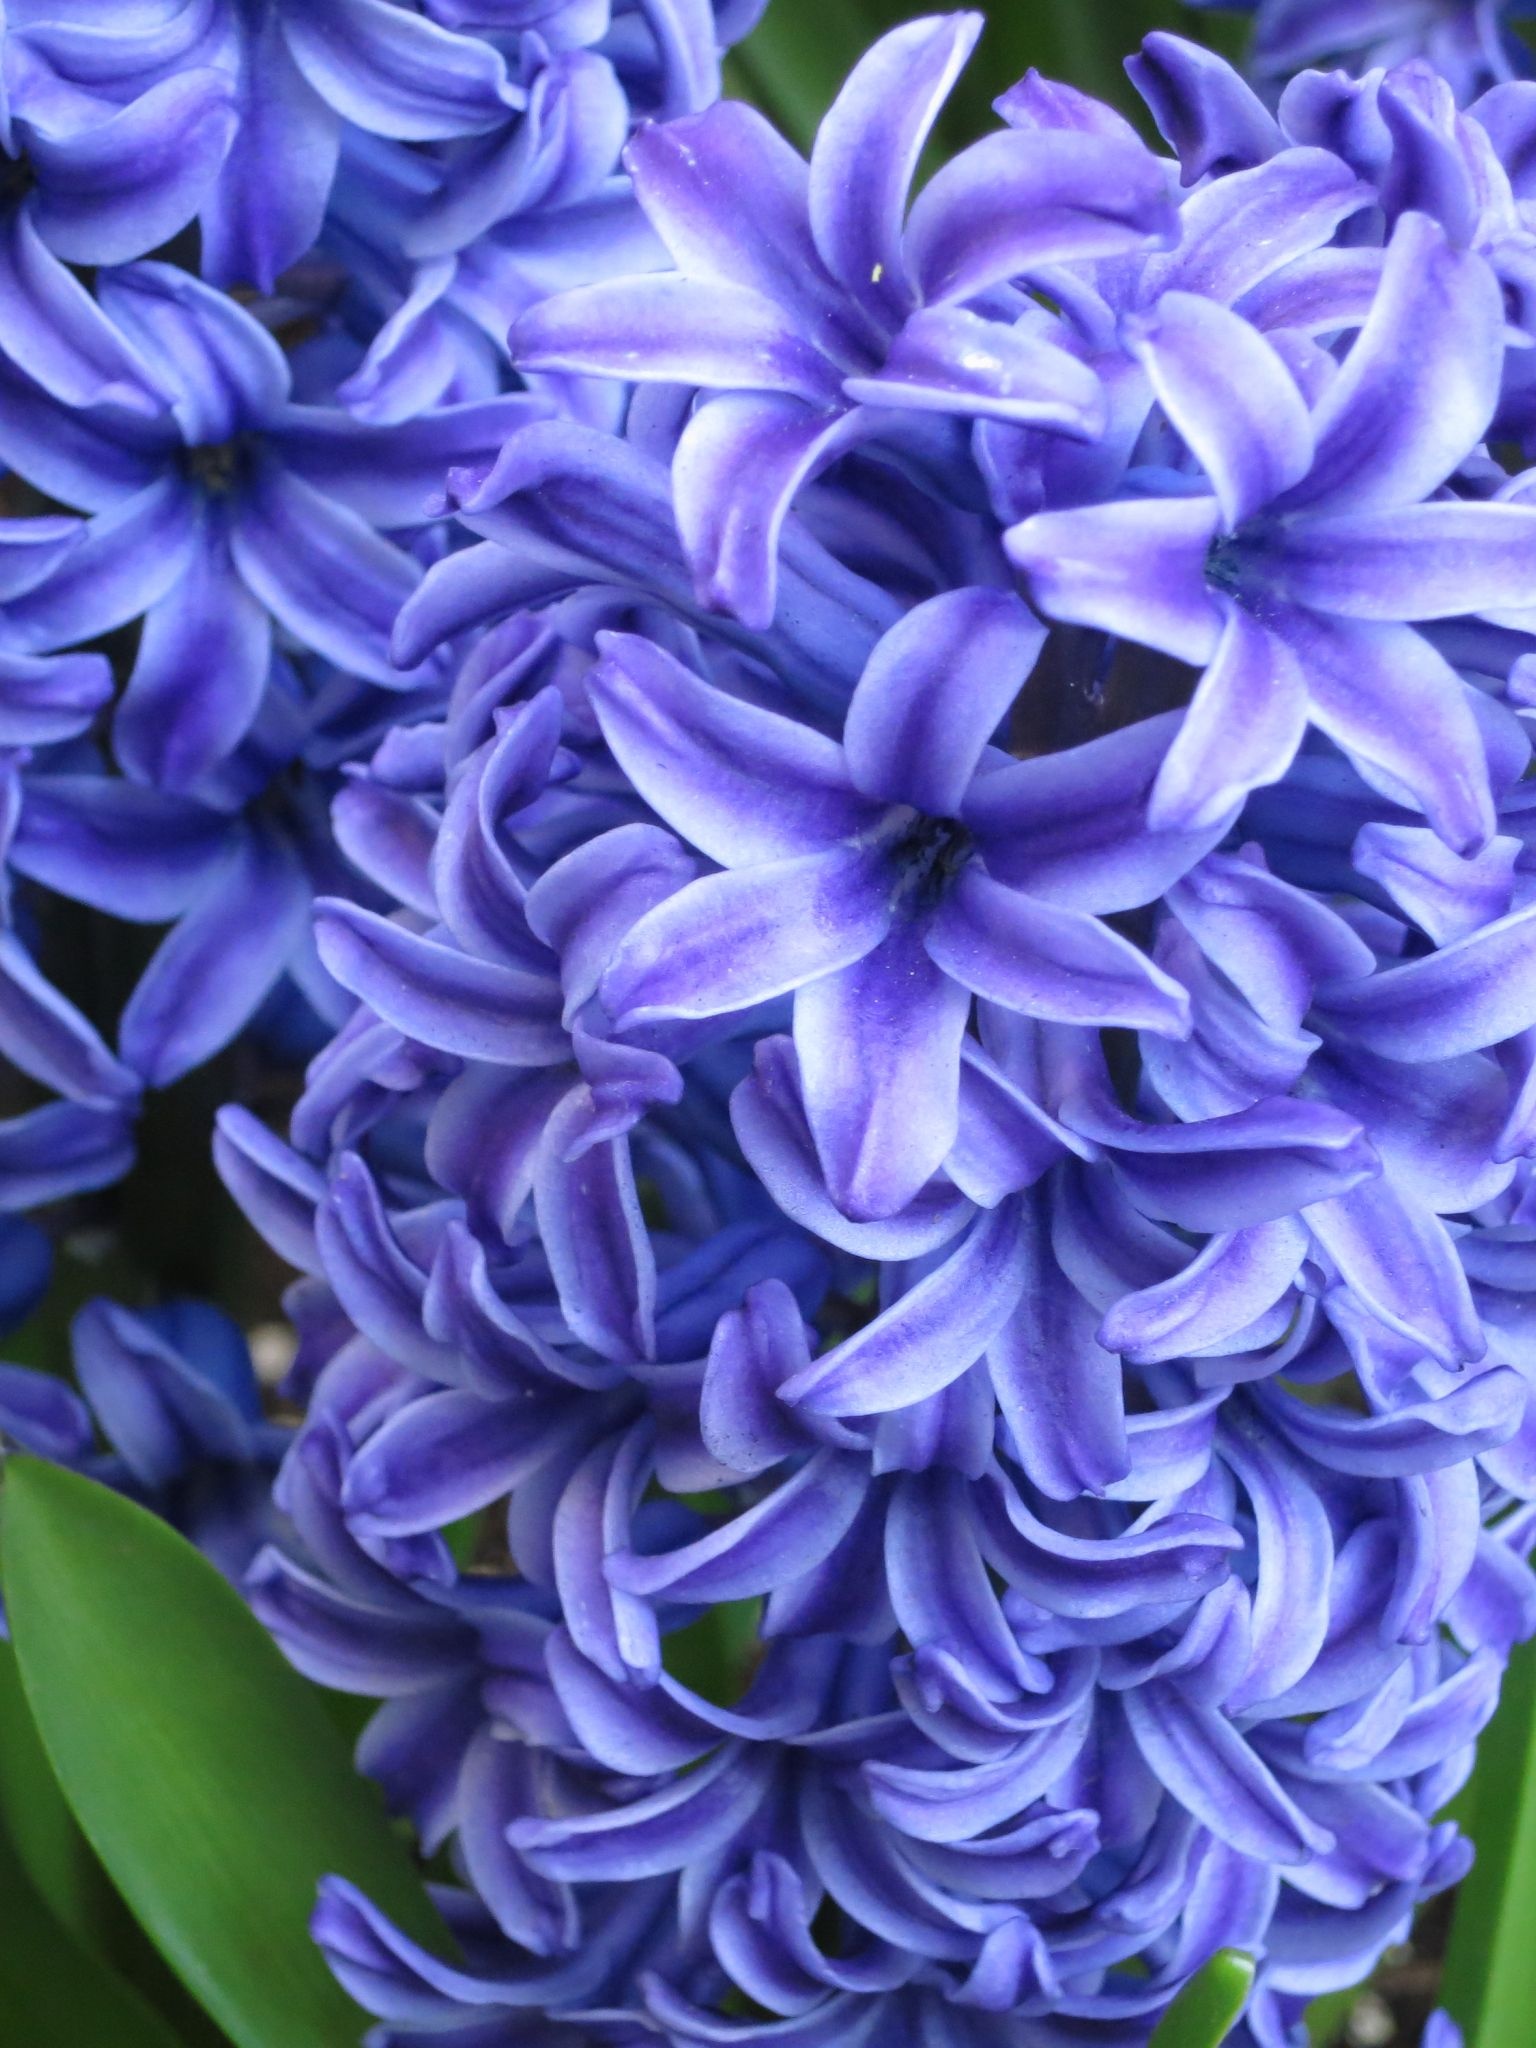 Hyacinth wallpapers, Free backgrounds, Nature's charm, Floral elegance, 1540x2050 HD Handy